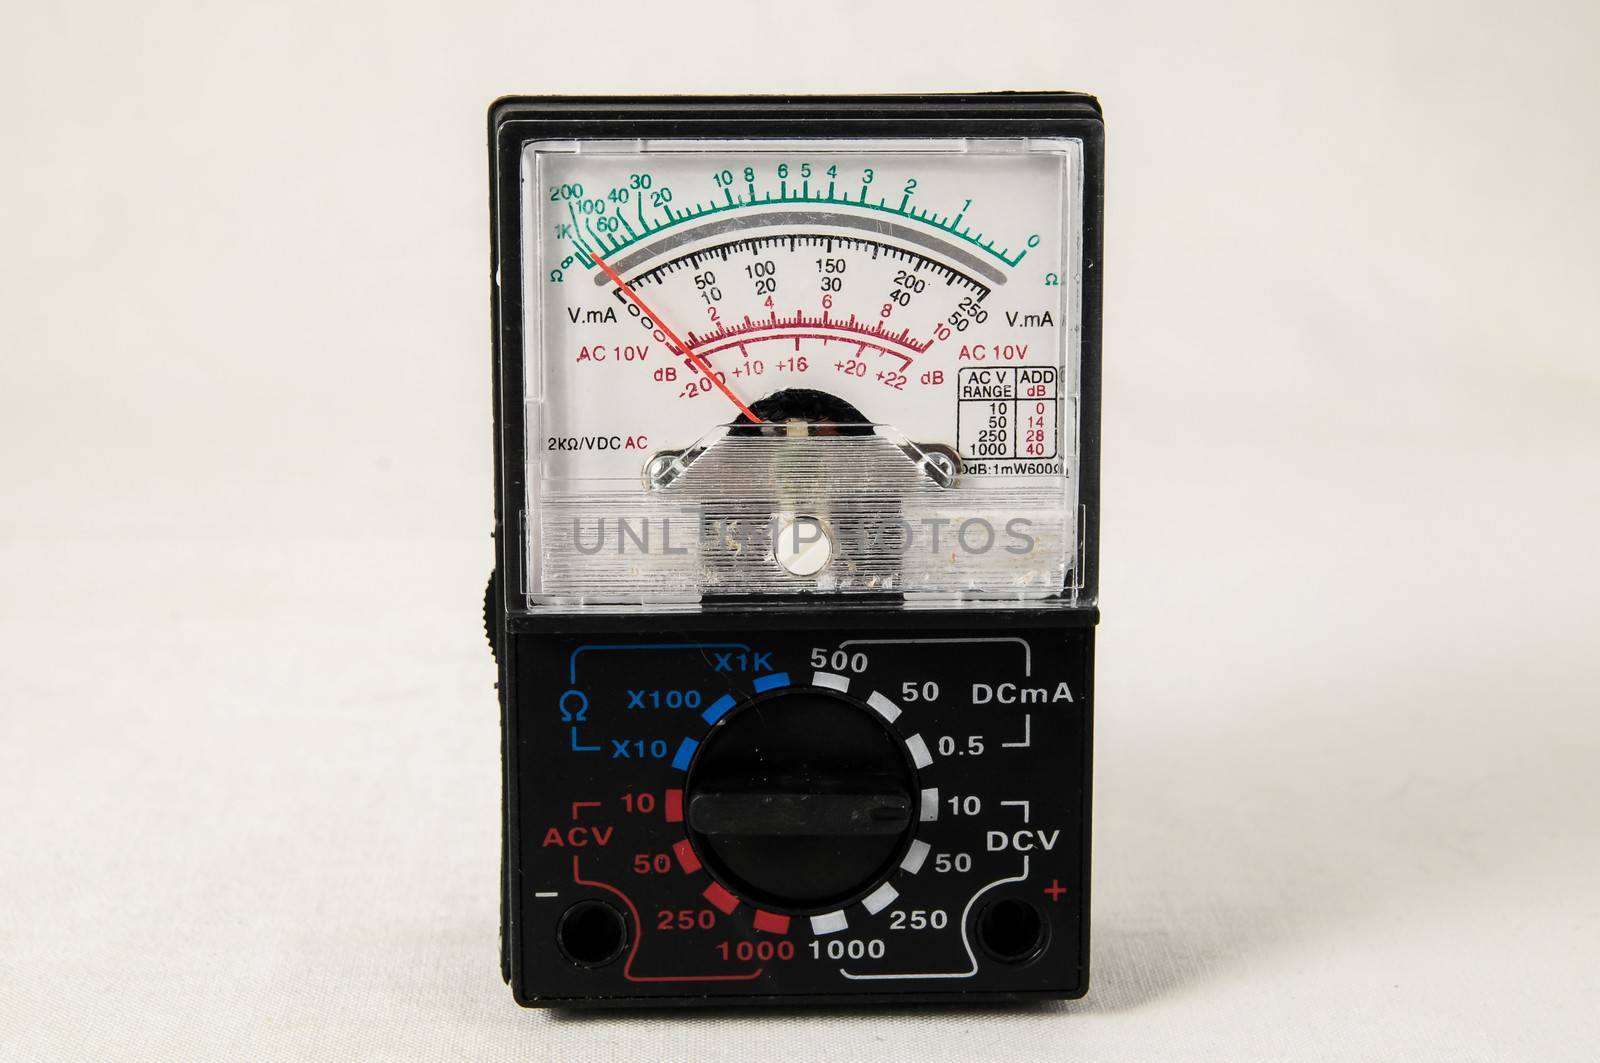 Classic New Electricity Simple Tester Tool on a White Background